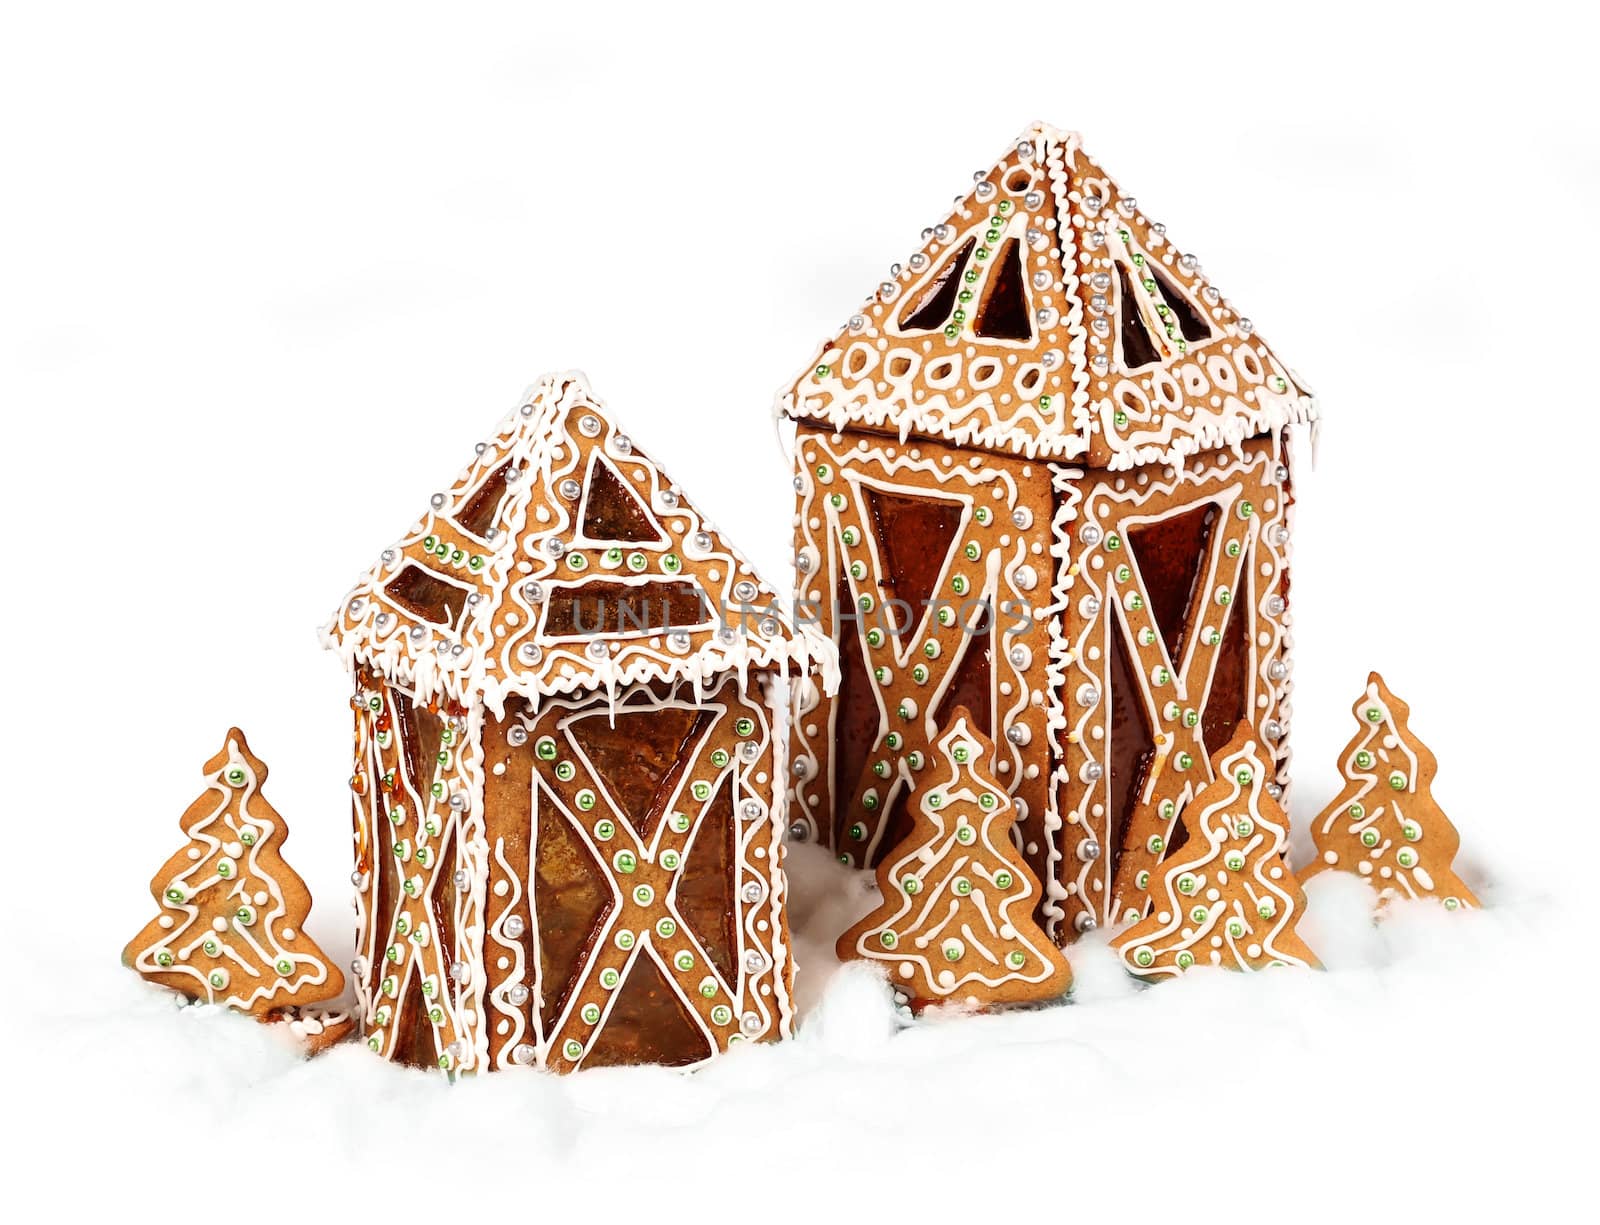 Gingerbread cookies lantern cottages by anterovium